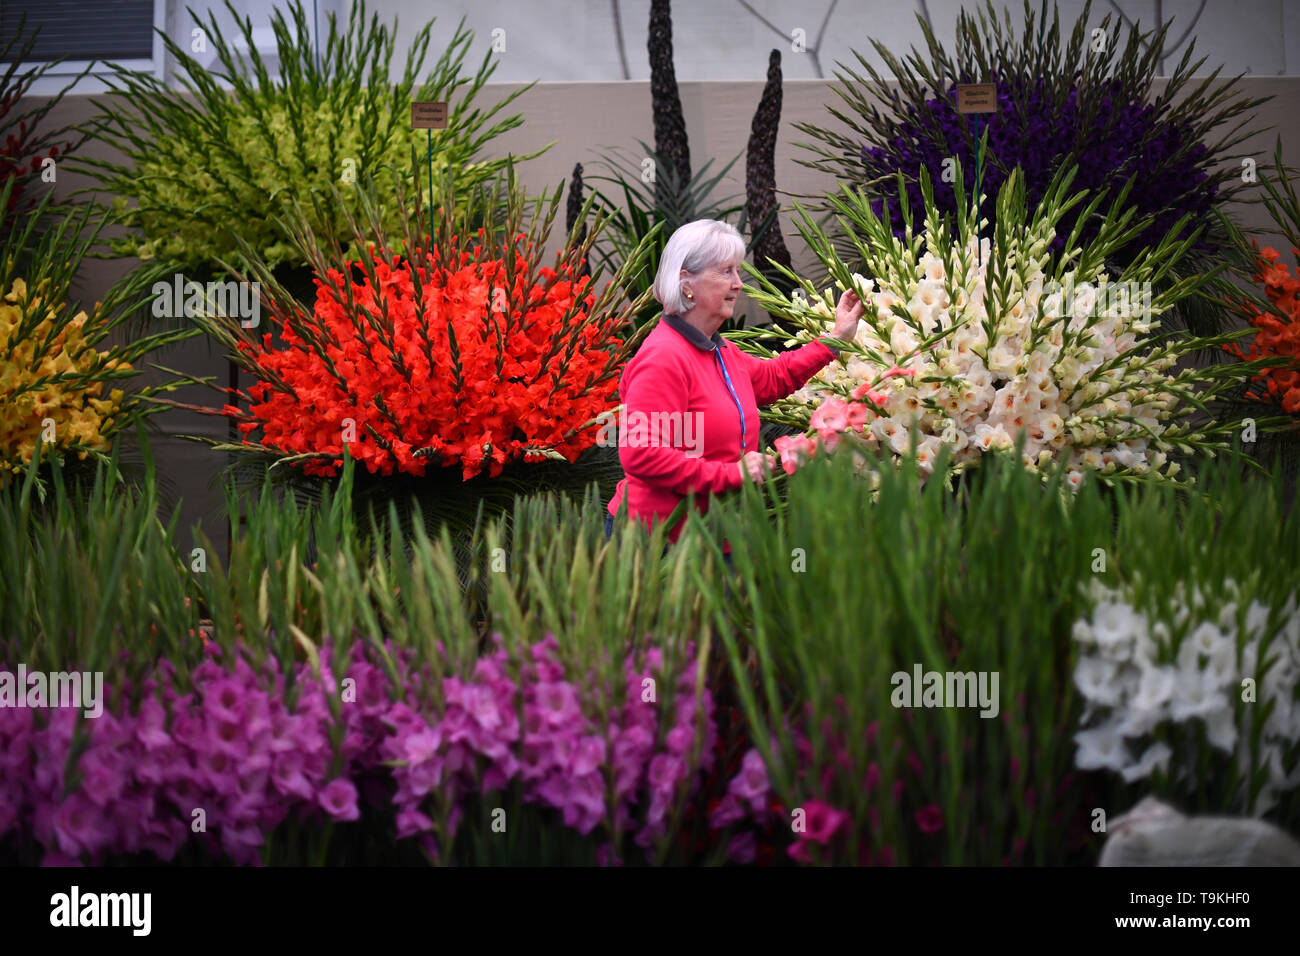 Finishing touches are applied to a display during preparations for the RHS Chelsea Flower Show at the Royal Hospital Chelsea, London. Stock Photo